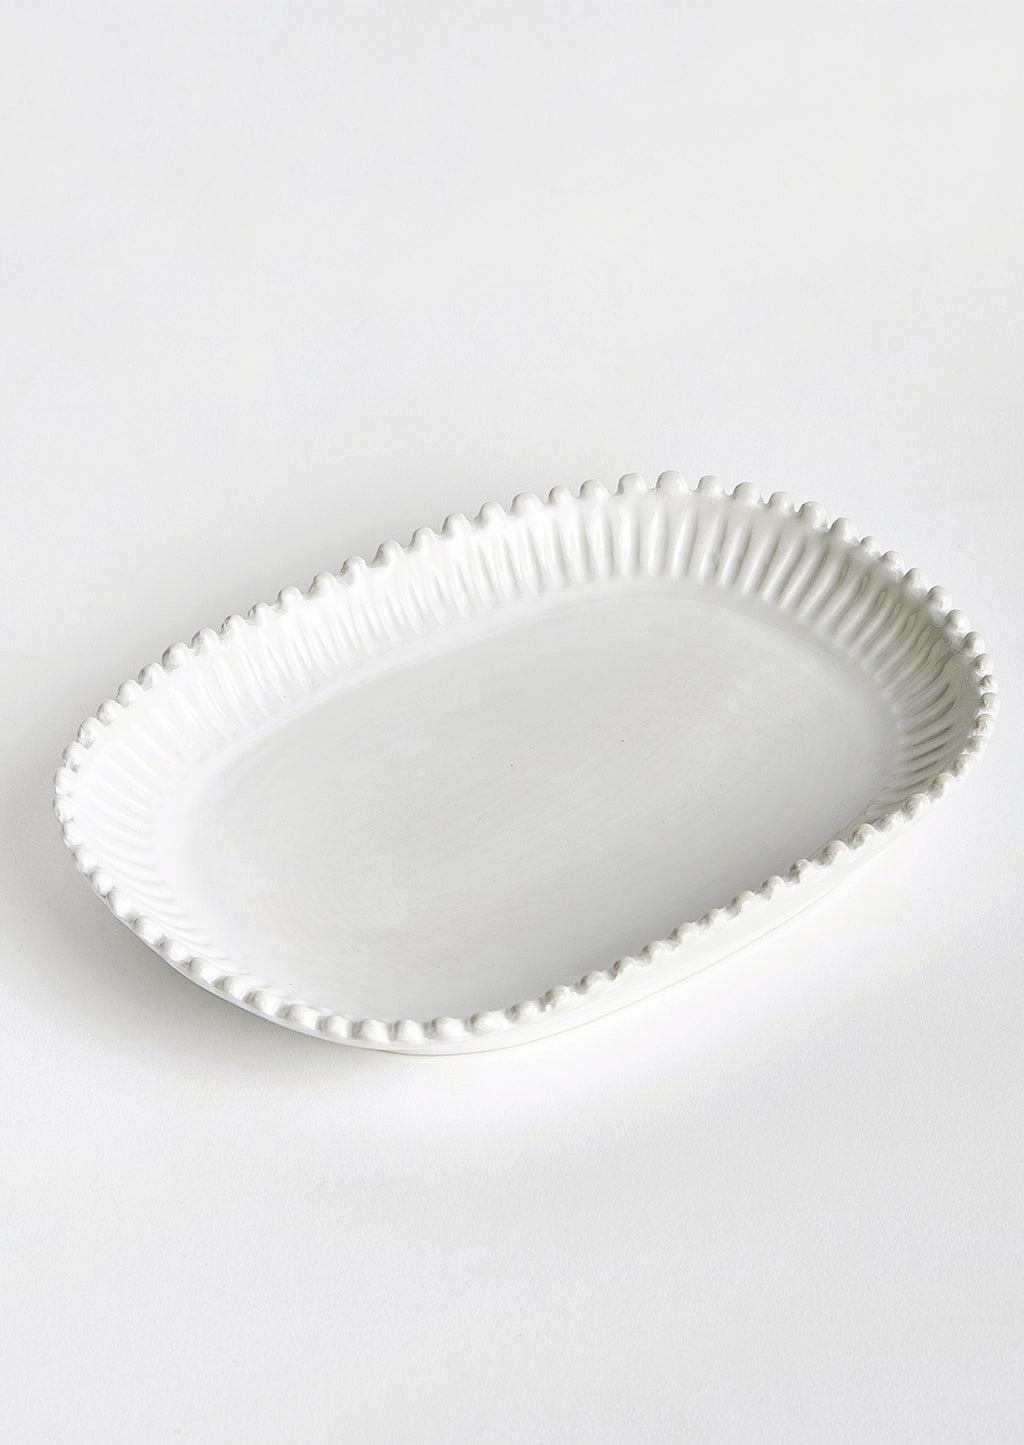 2: A rectangular ceramic platter in white with rounded edges and hobnail pleated border.